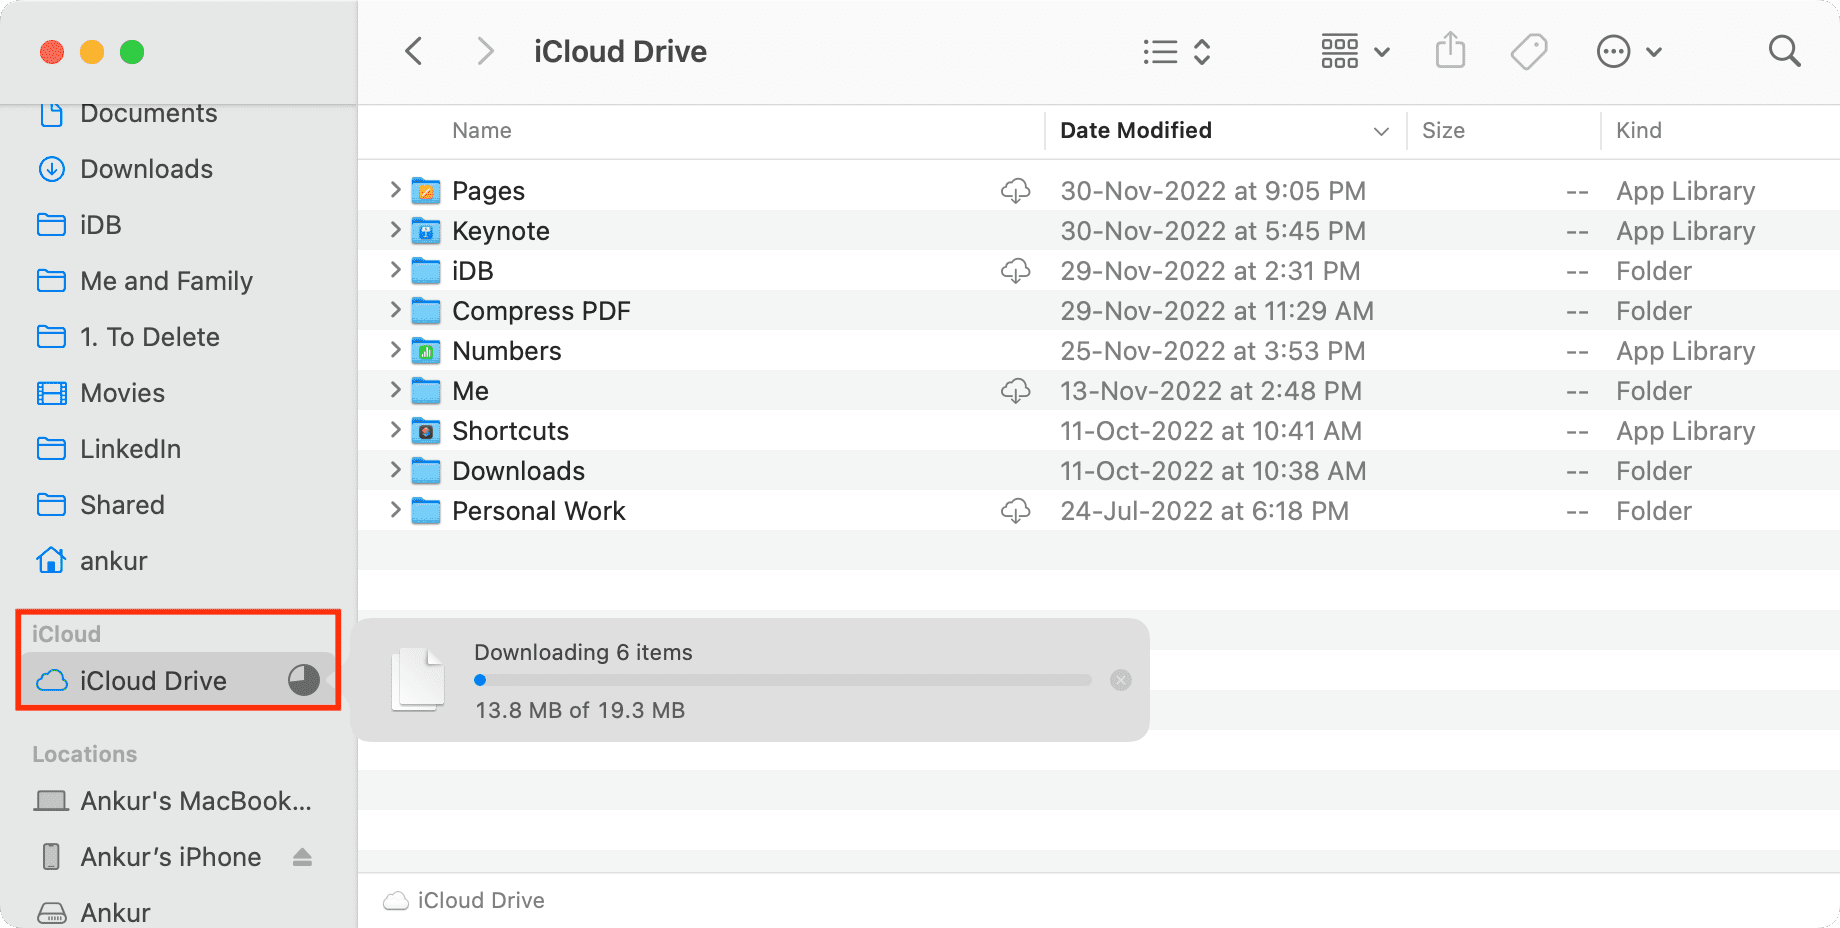 iCloud Drive section in Finder on Mac